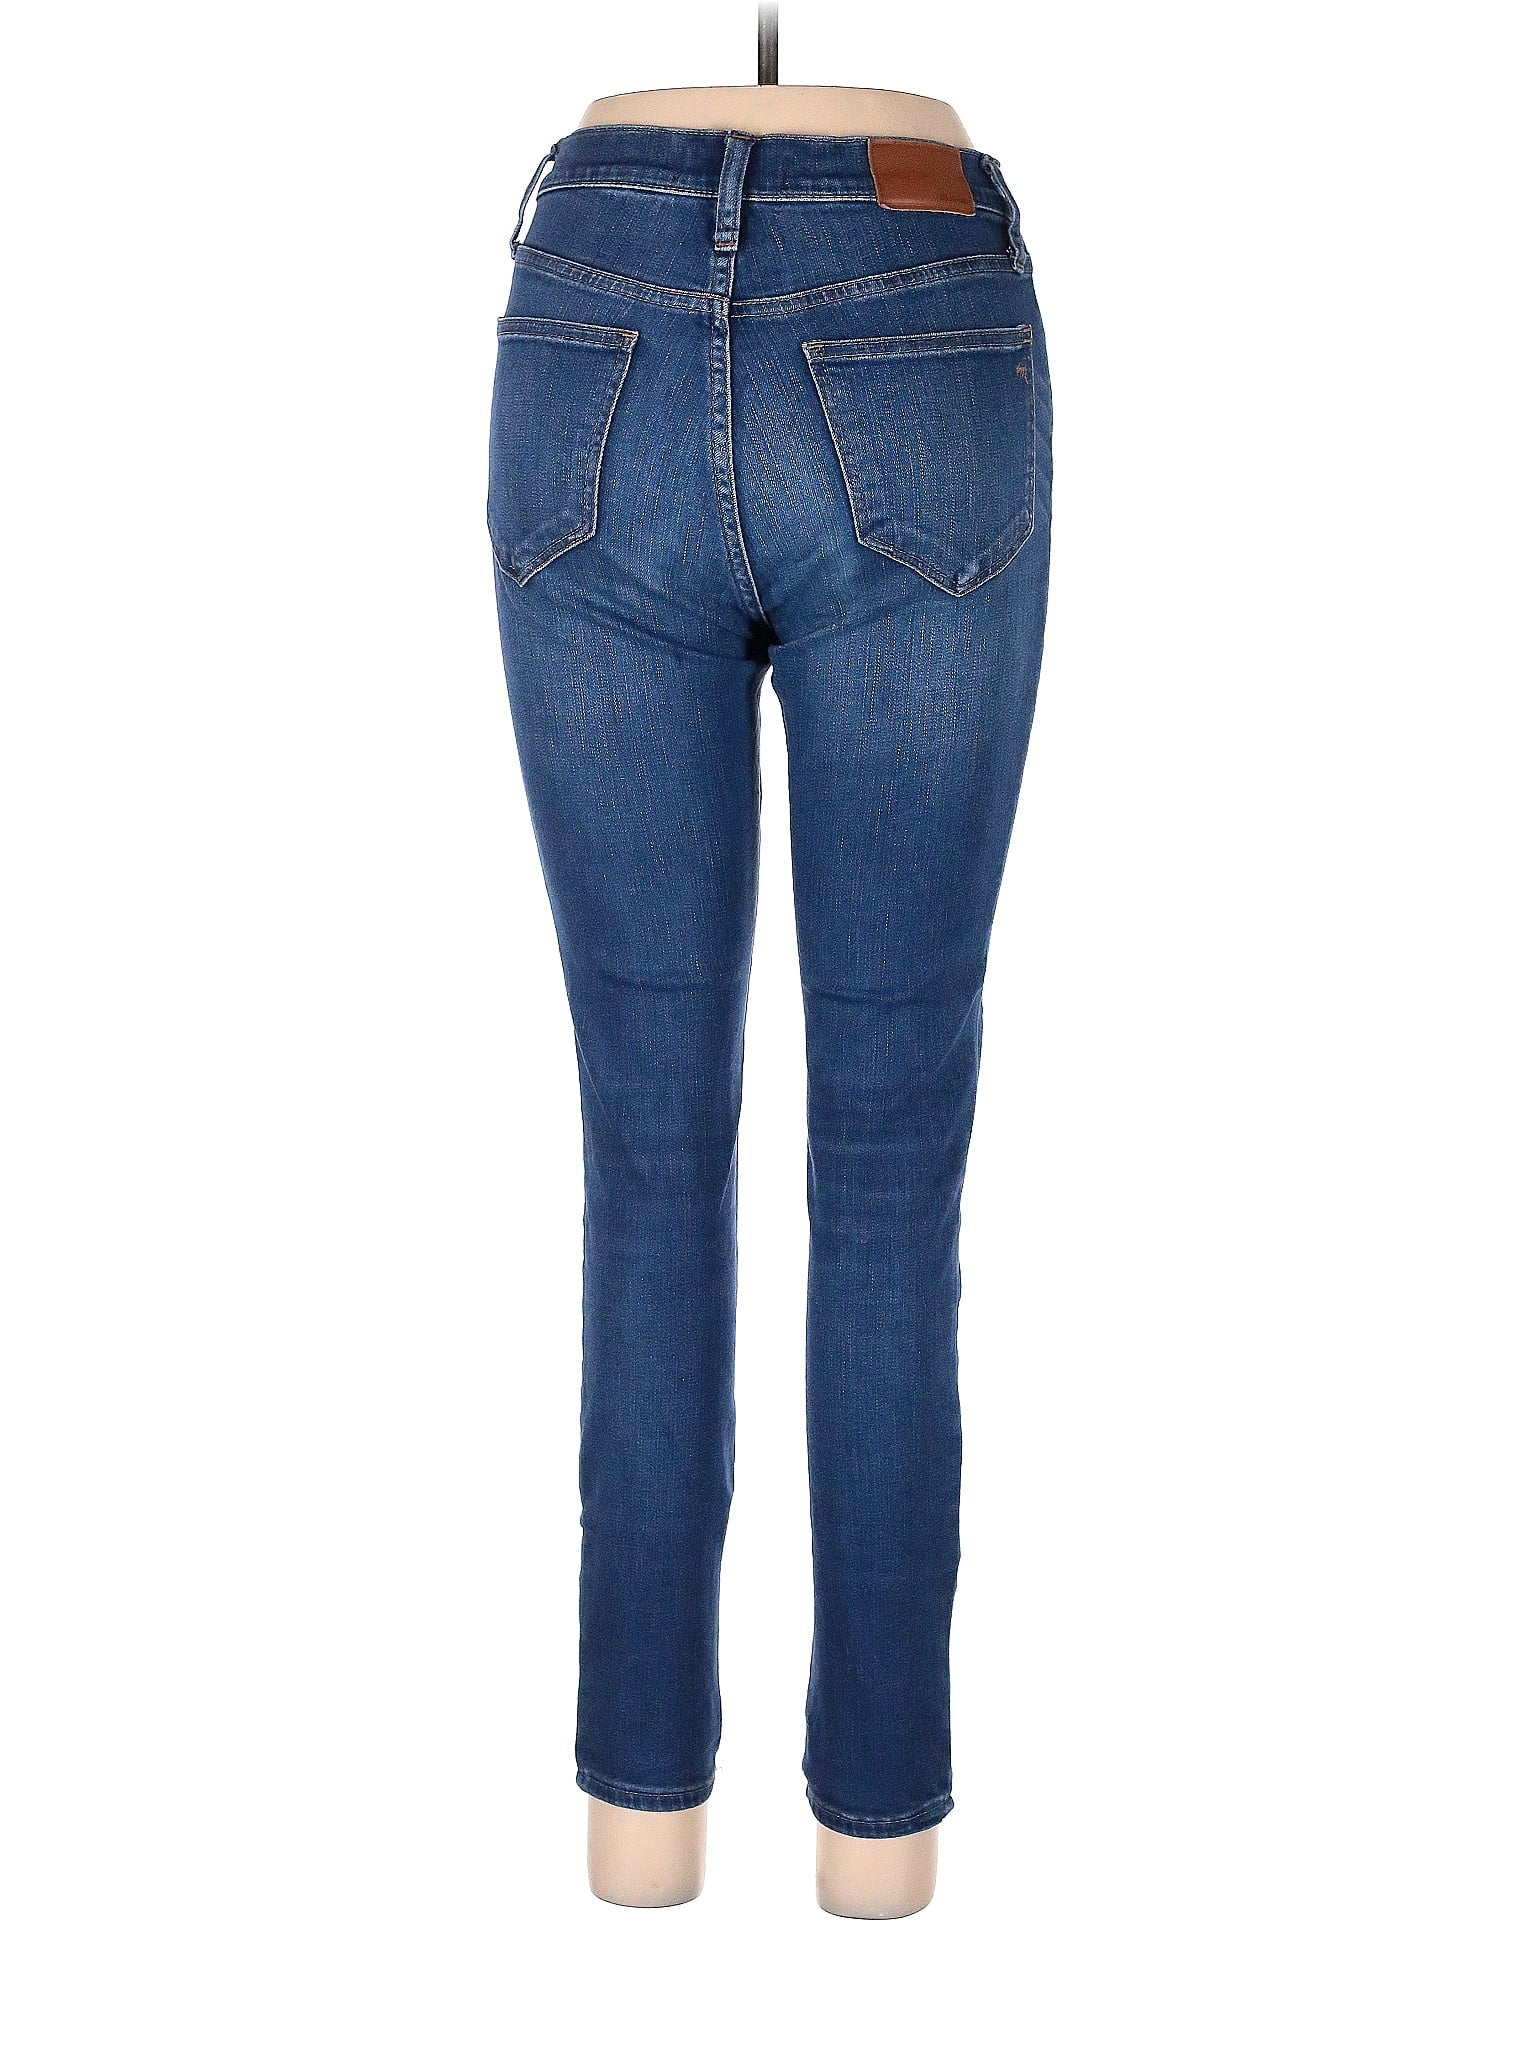 High-Rise Skinny Jeans in Medium Wash waist size - 27